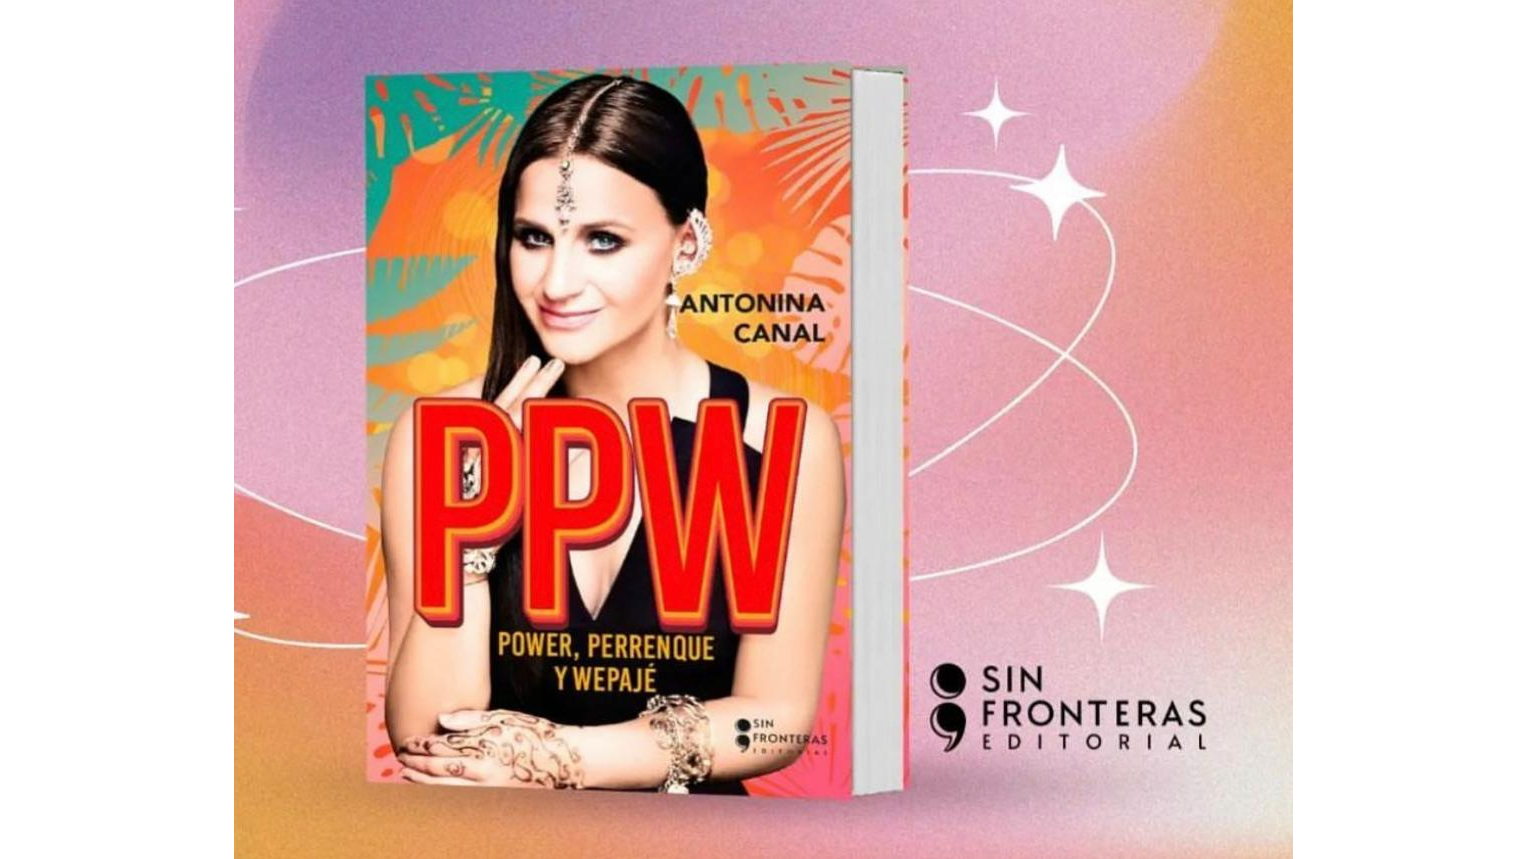 PPW: Perrenque Power y Wepajé